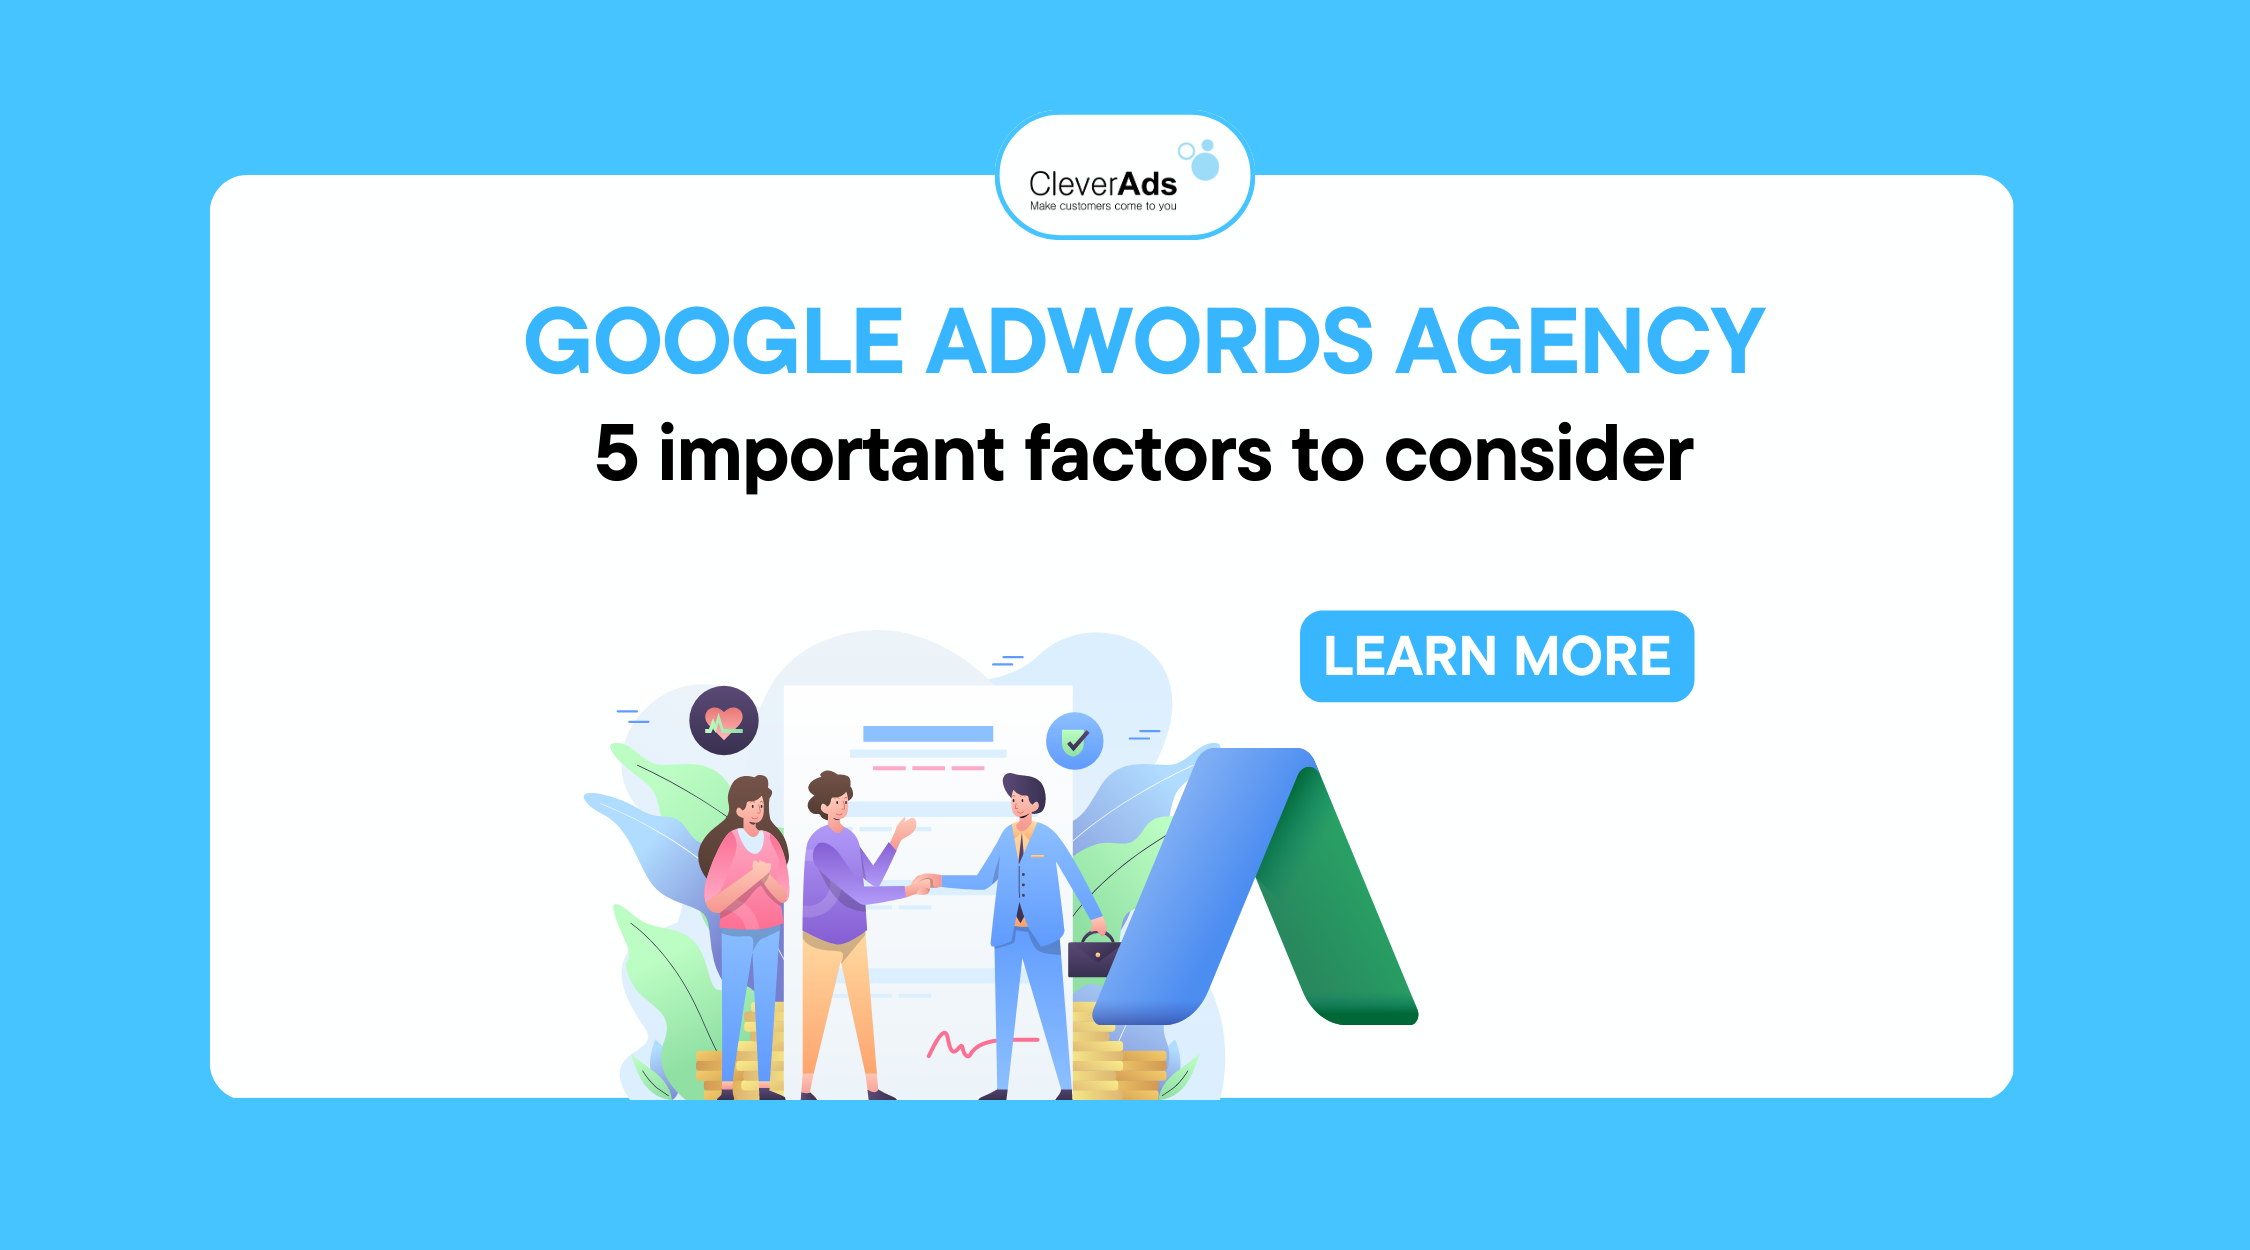 Google Adwords Agency: 5 important factors to consider